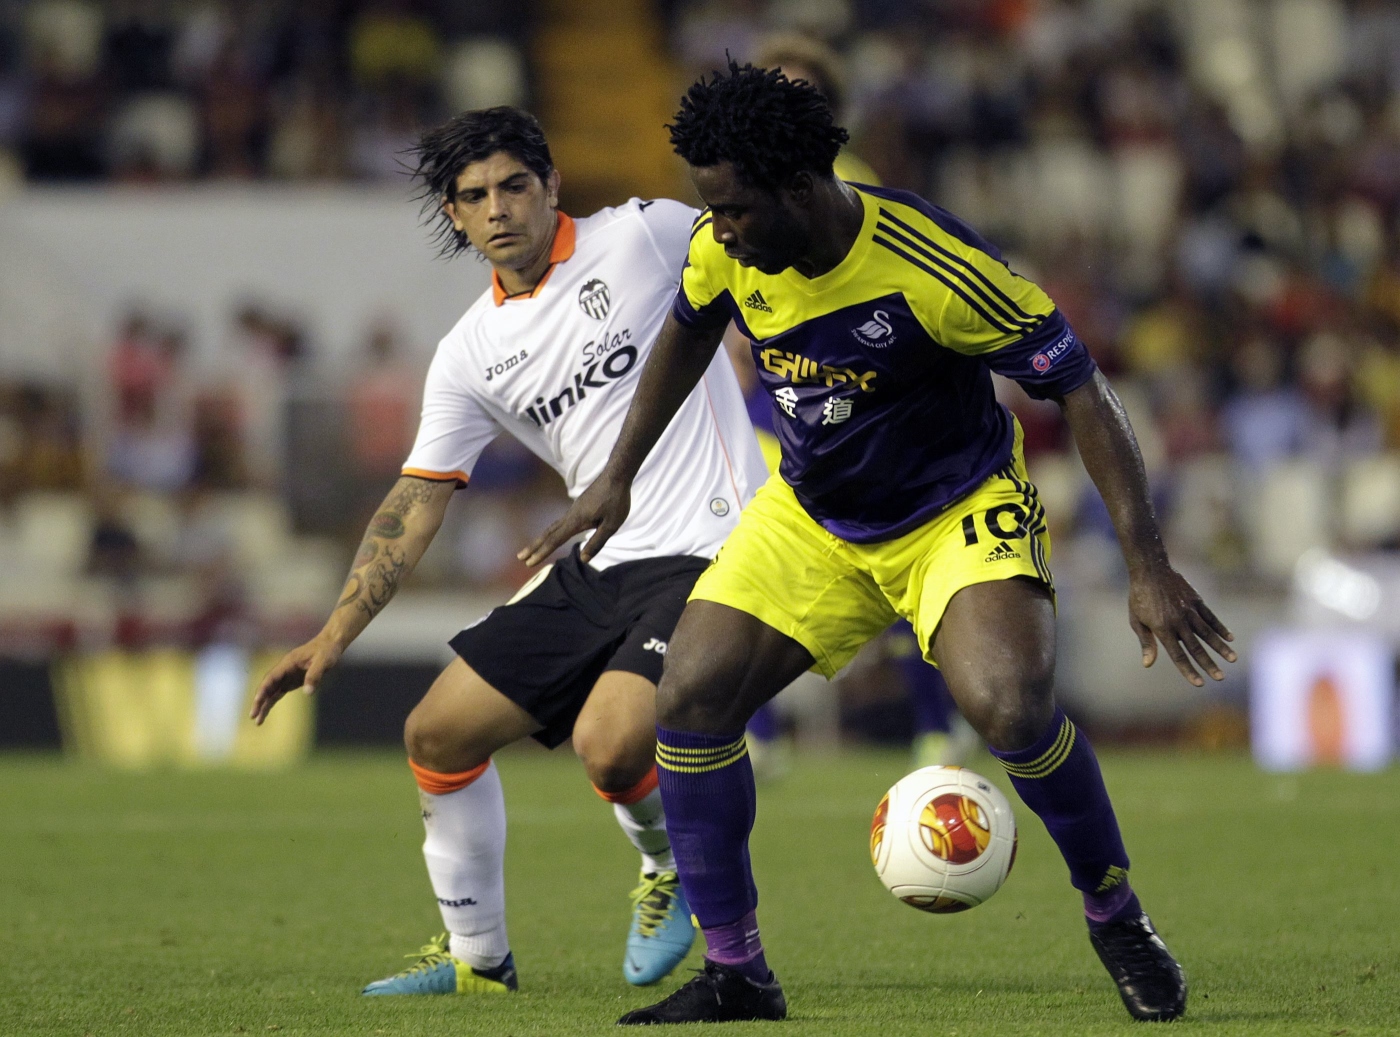 Swansea City's Wilfried Bony (R) and Valencia's Ever Banega fight for the ball during their Europa League soccer match at the Mestalla stadium in Valencia. Photo: Reuters